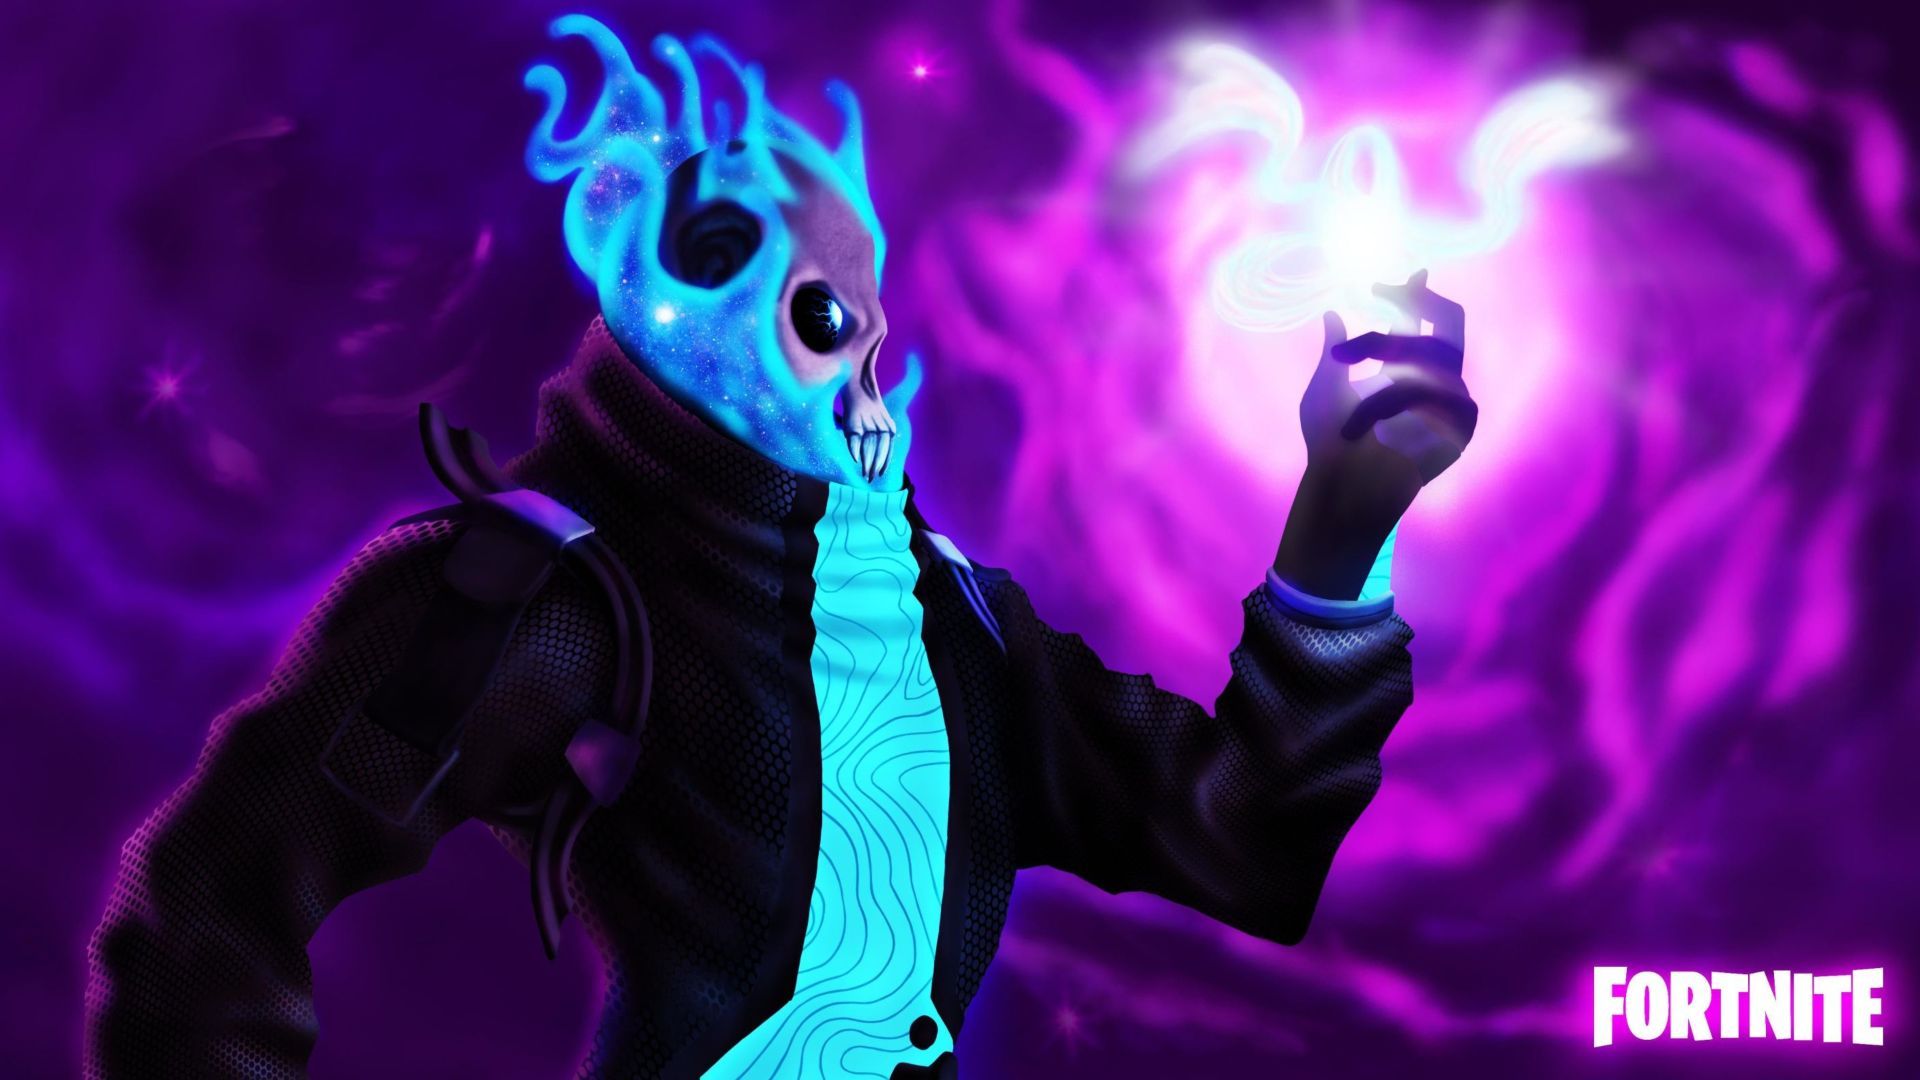 Eternal Voyager Fortnite like a Ghost Rider